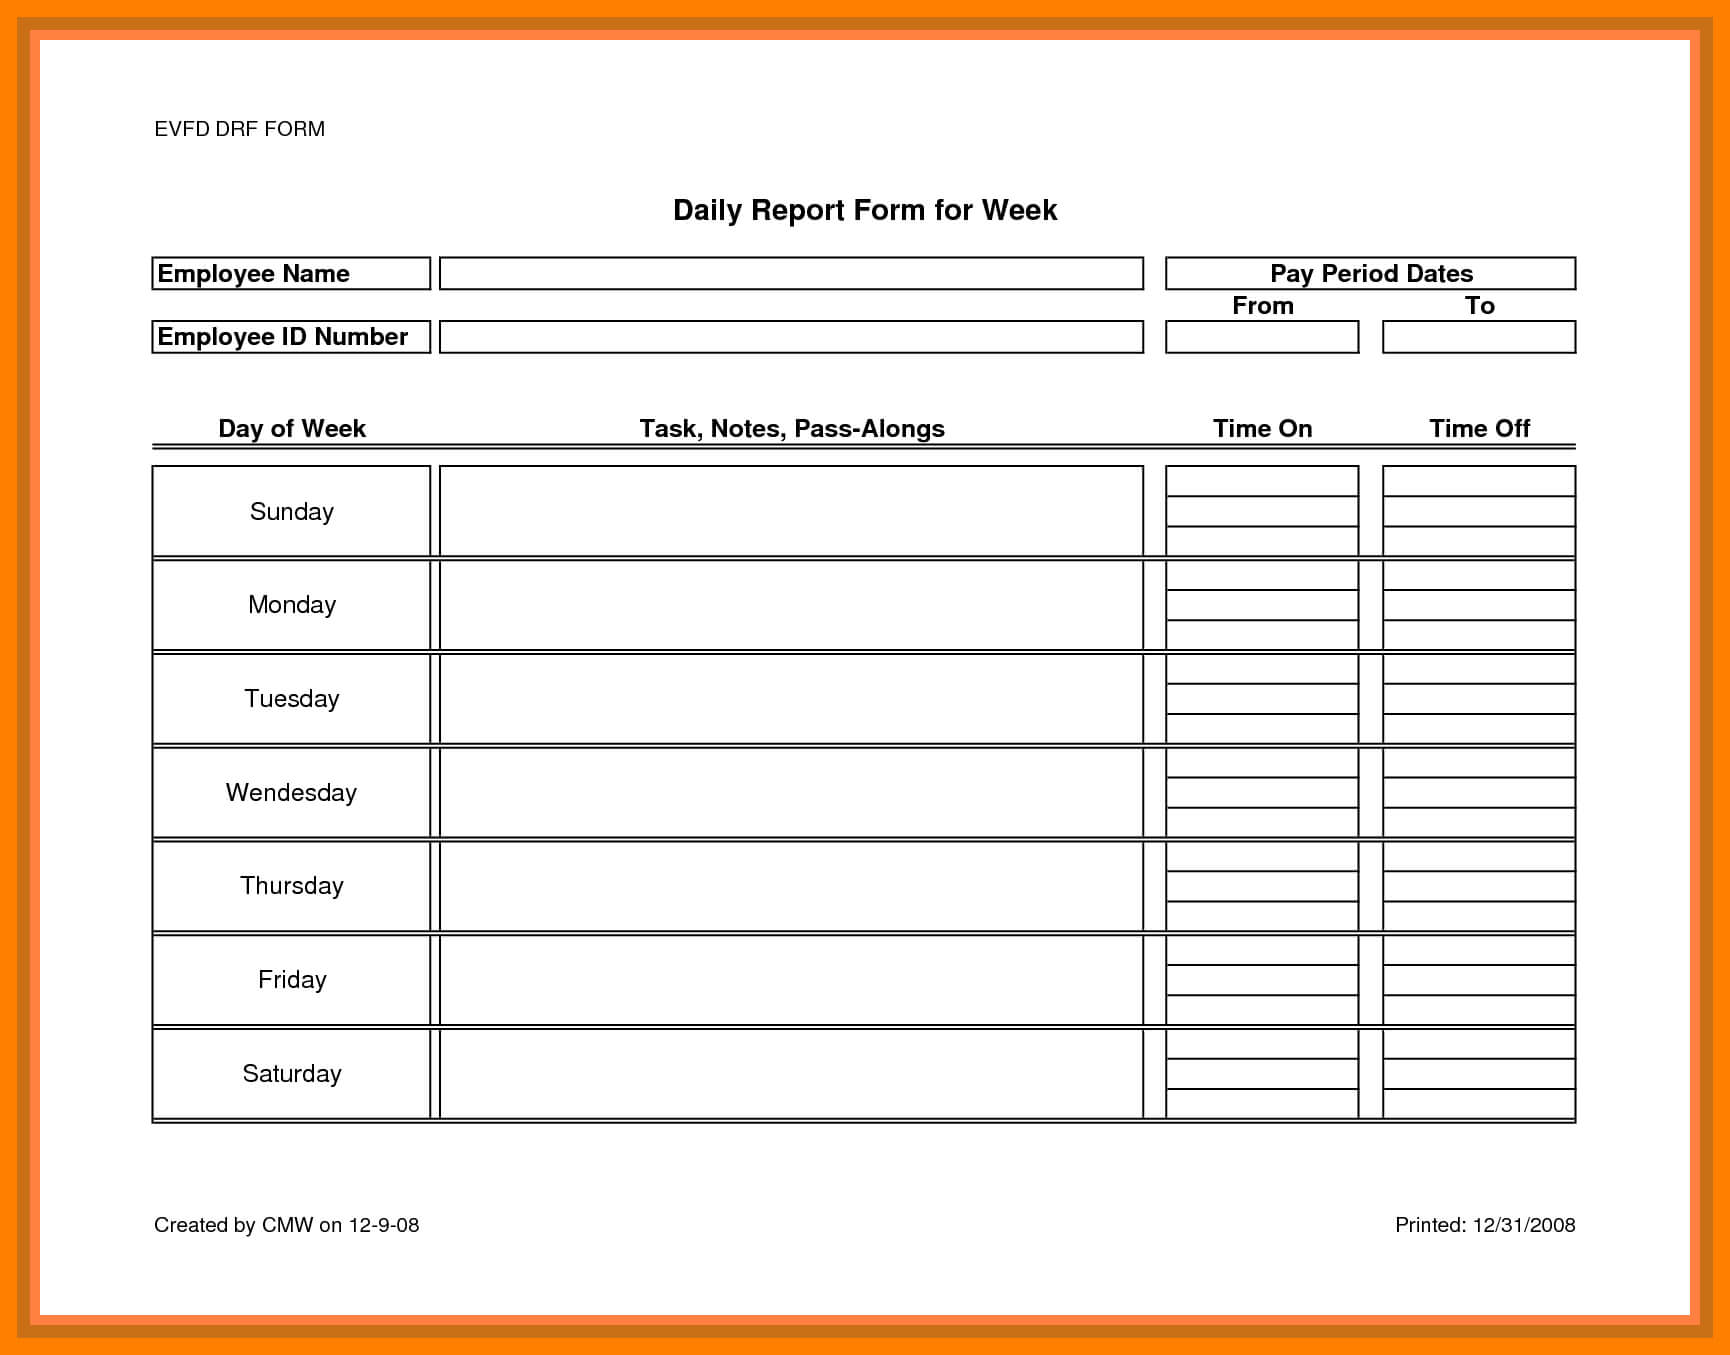 007 Daily Work Report Template Ideas Reports Business Regarding Daily Work Report Template